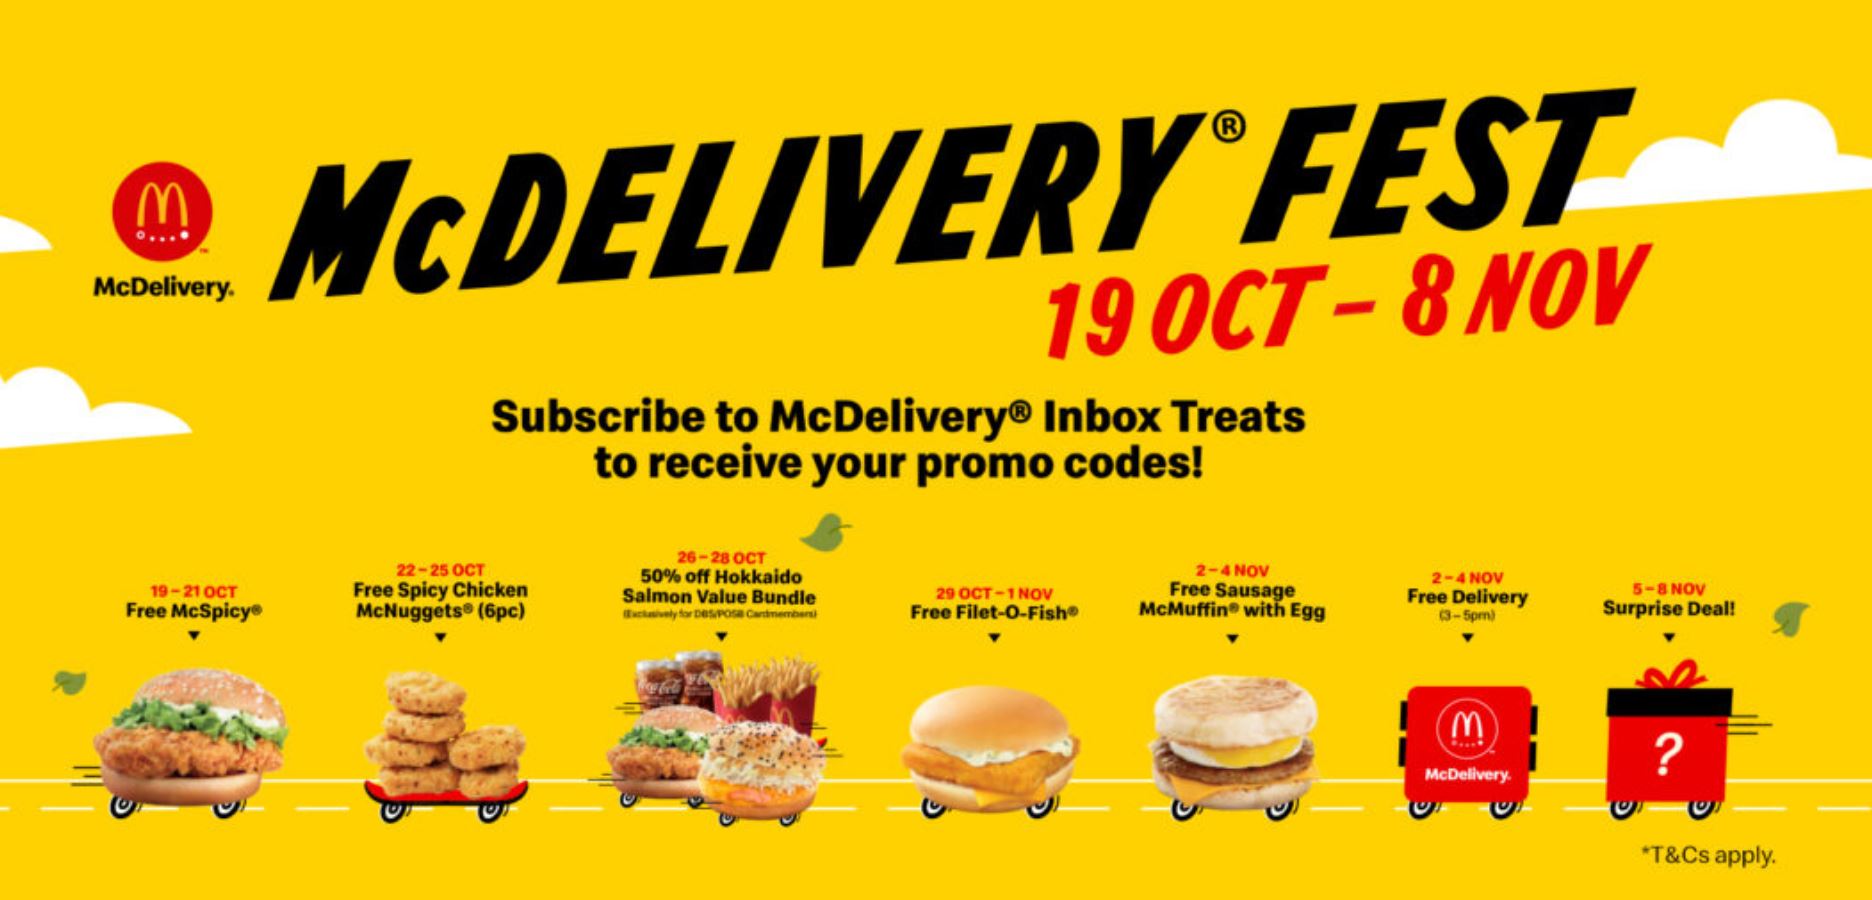 Ordering McDelivery? Get free McSpicy, Filet-O-Fish and more with any purchase when you subscribe to McDelivery®️ Inbox Treats - 1